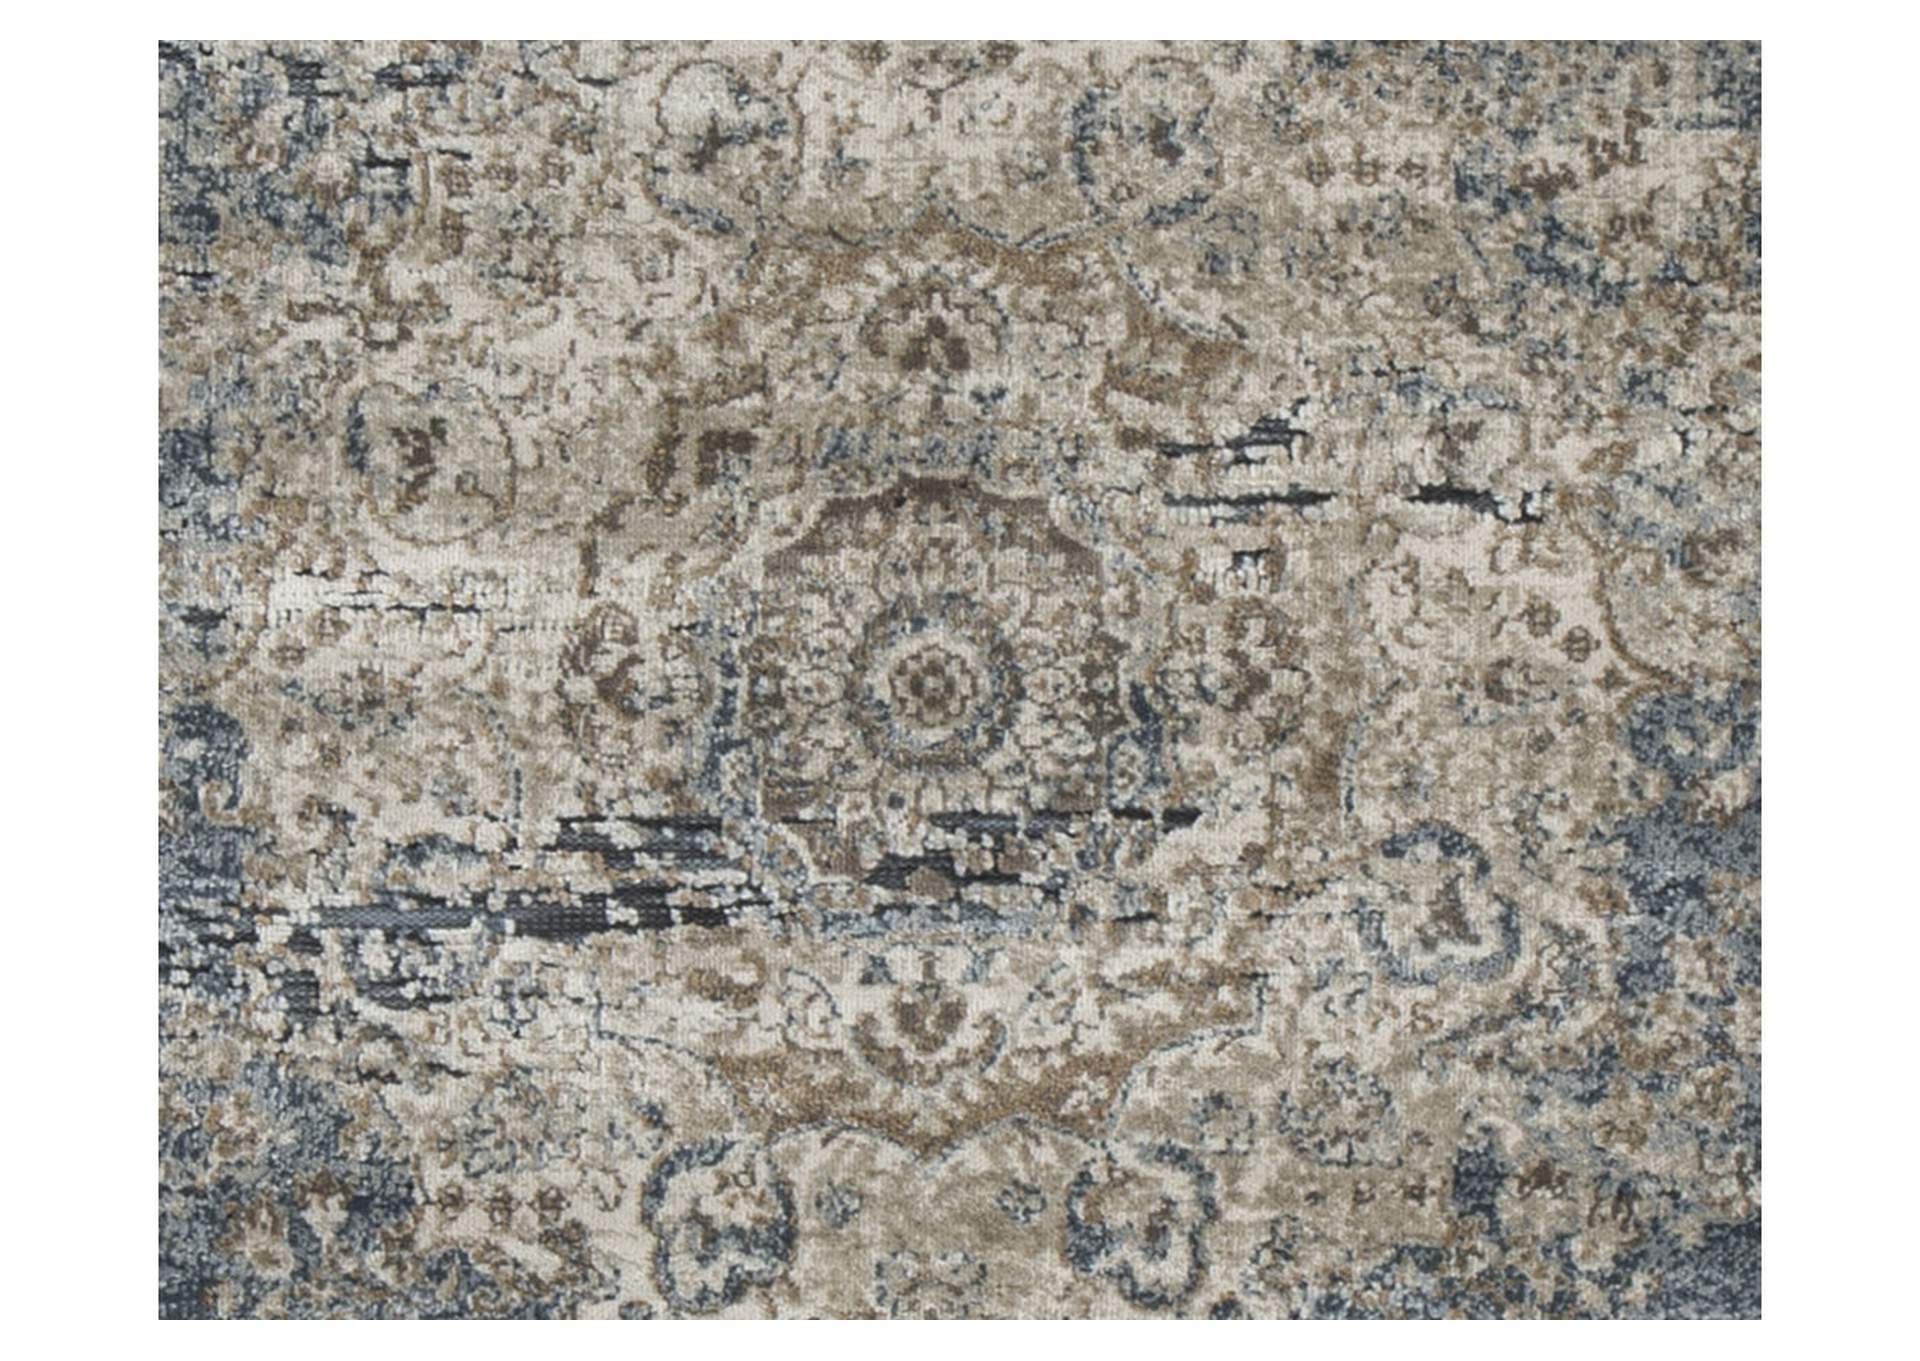 South Blue/Tan Large Rug,Direct To Consumer Express